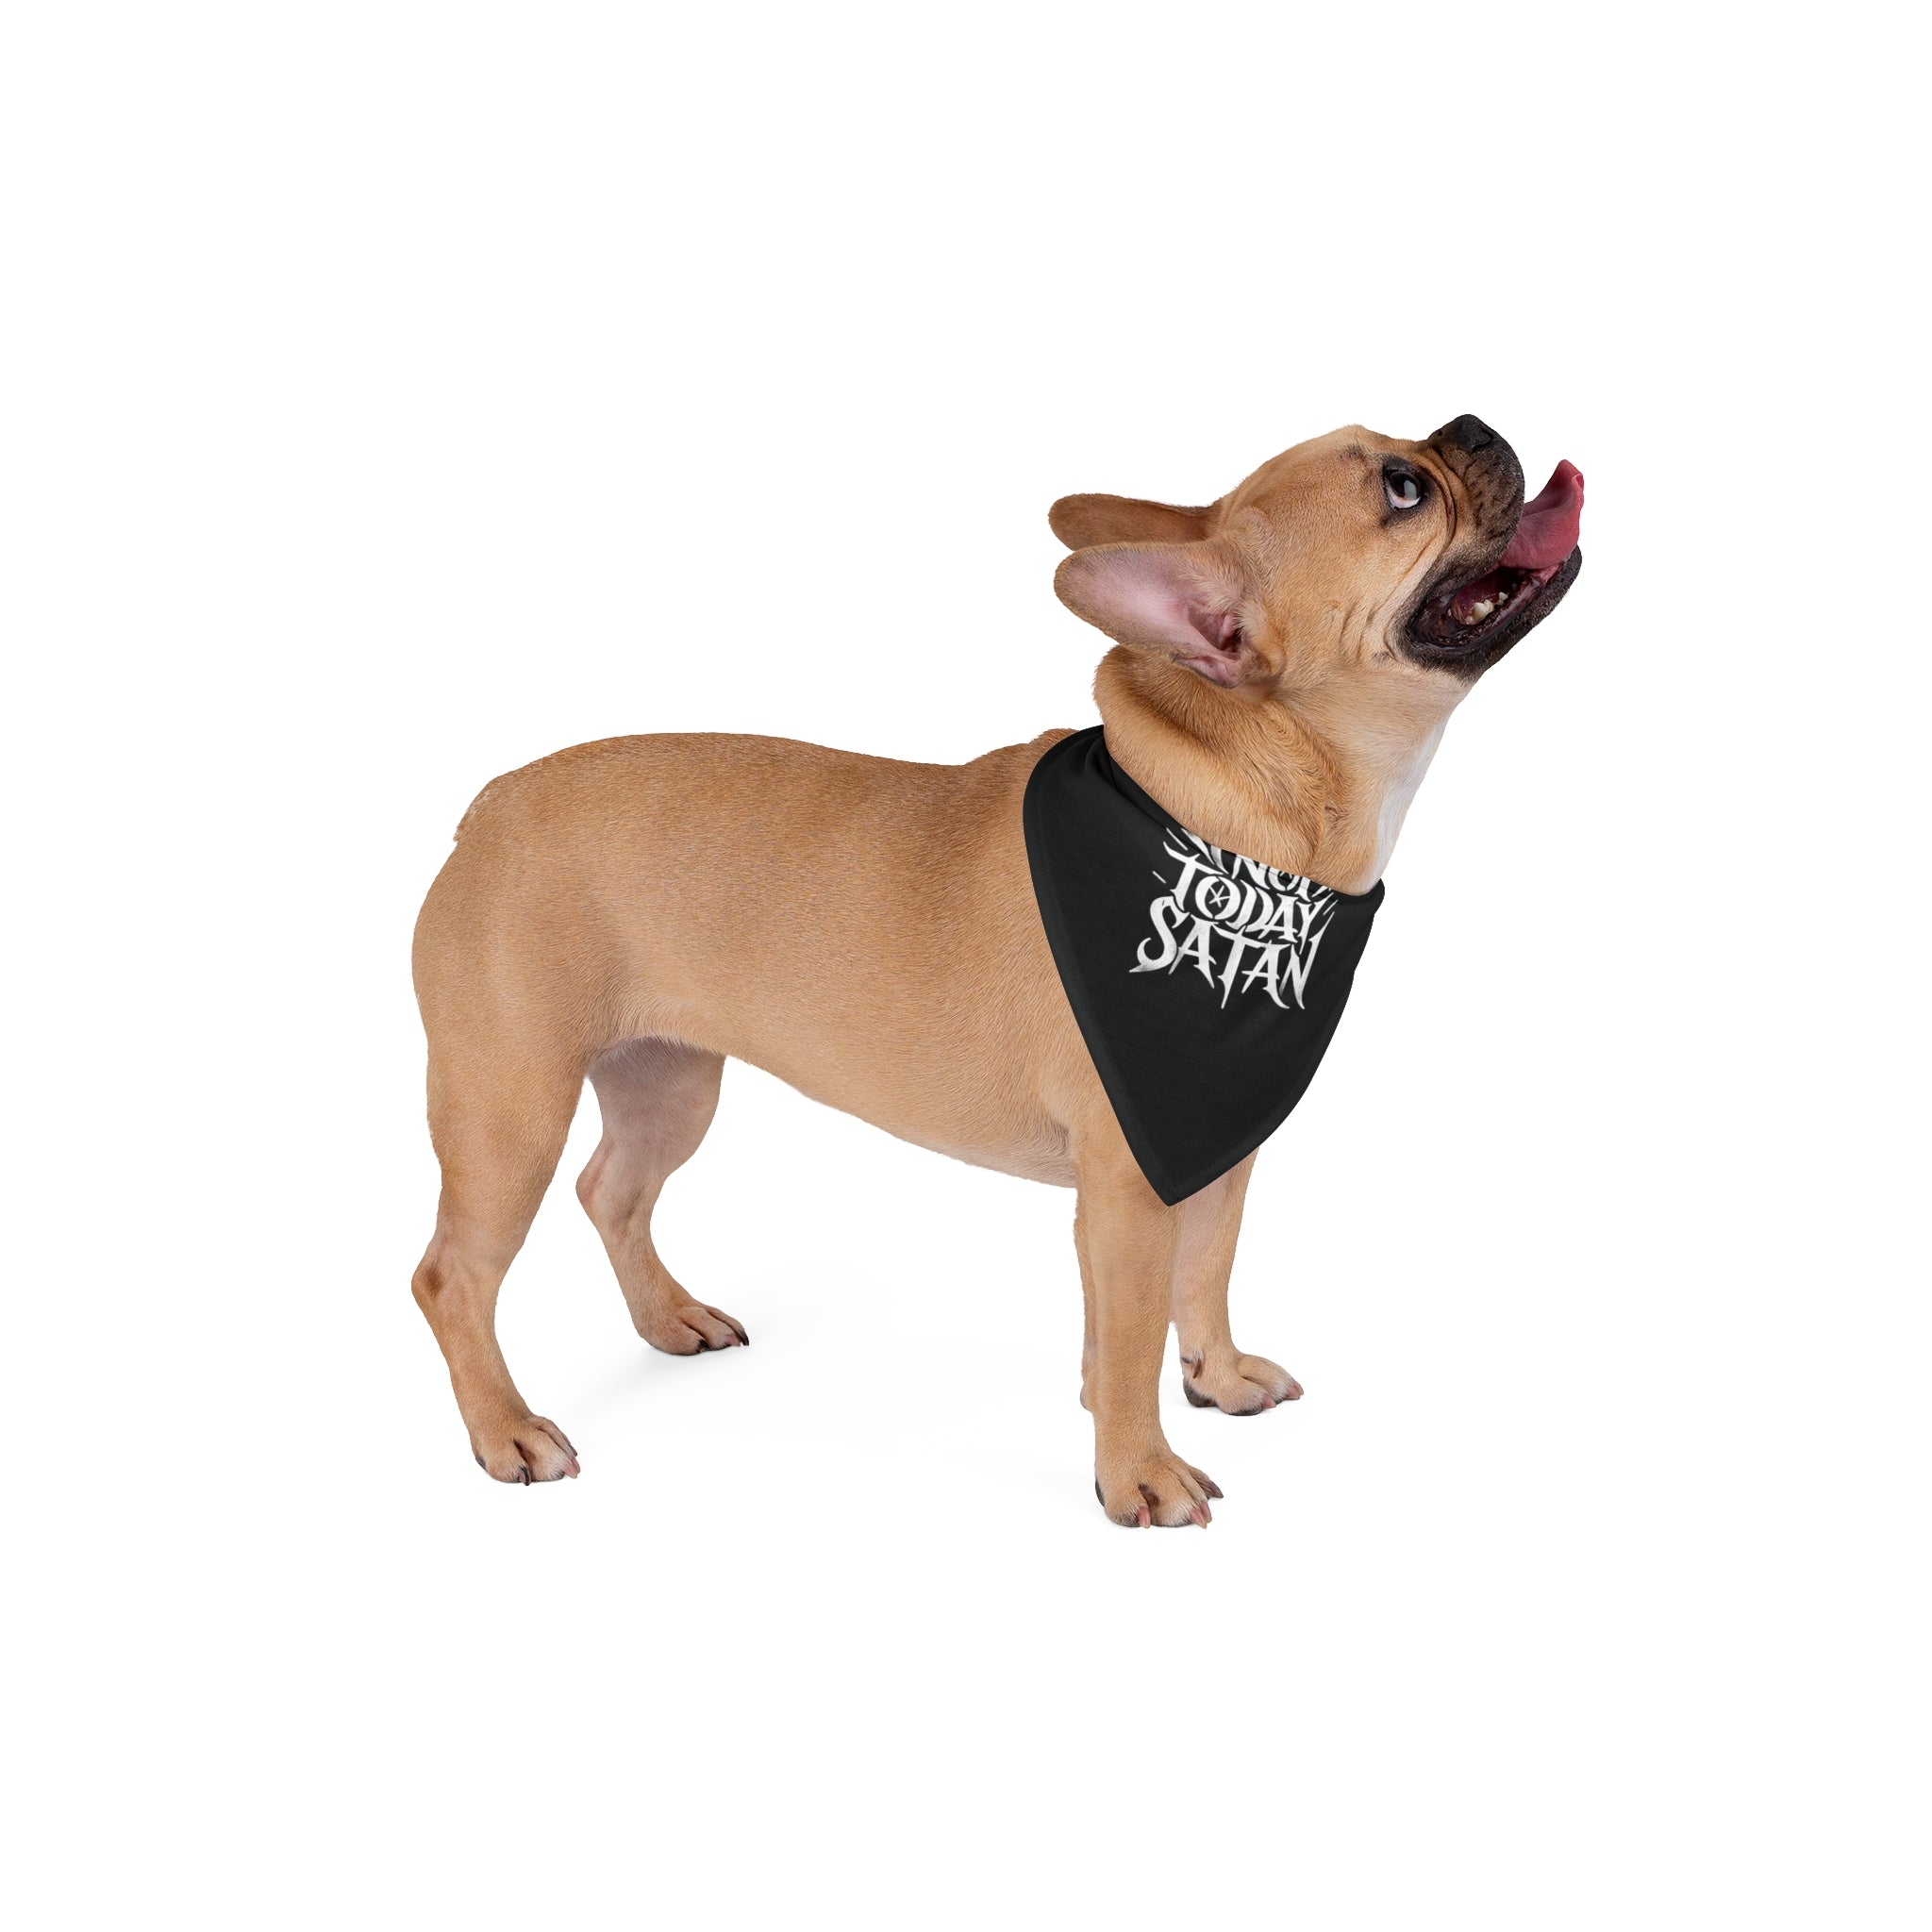 A light brown French Bulldog is standing, wearing a Not Today Satan - Pet Bandana that reads "NOT TODAY SATAN," and looking upwards with its tongue out.